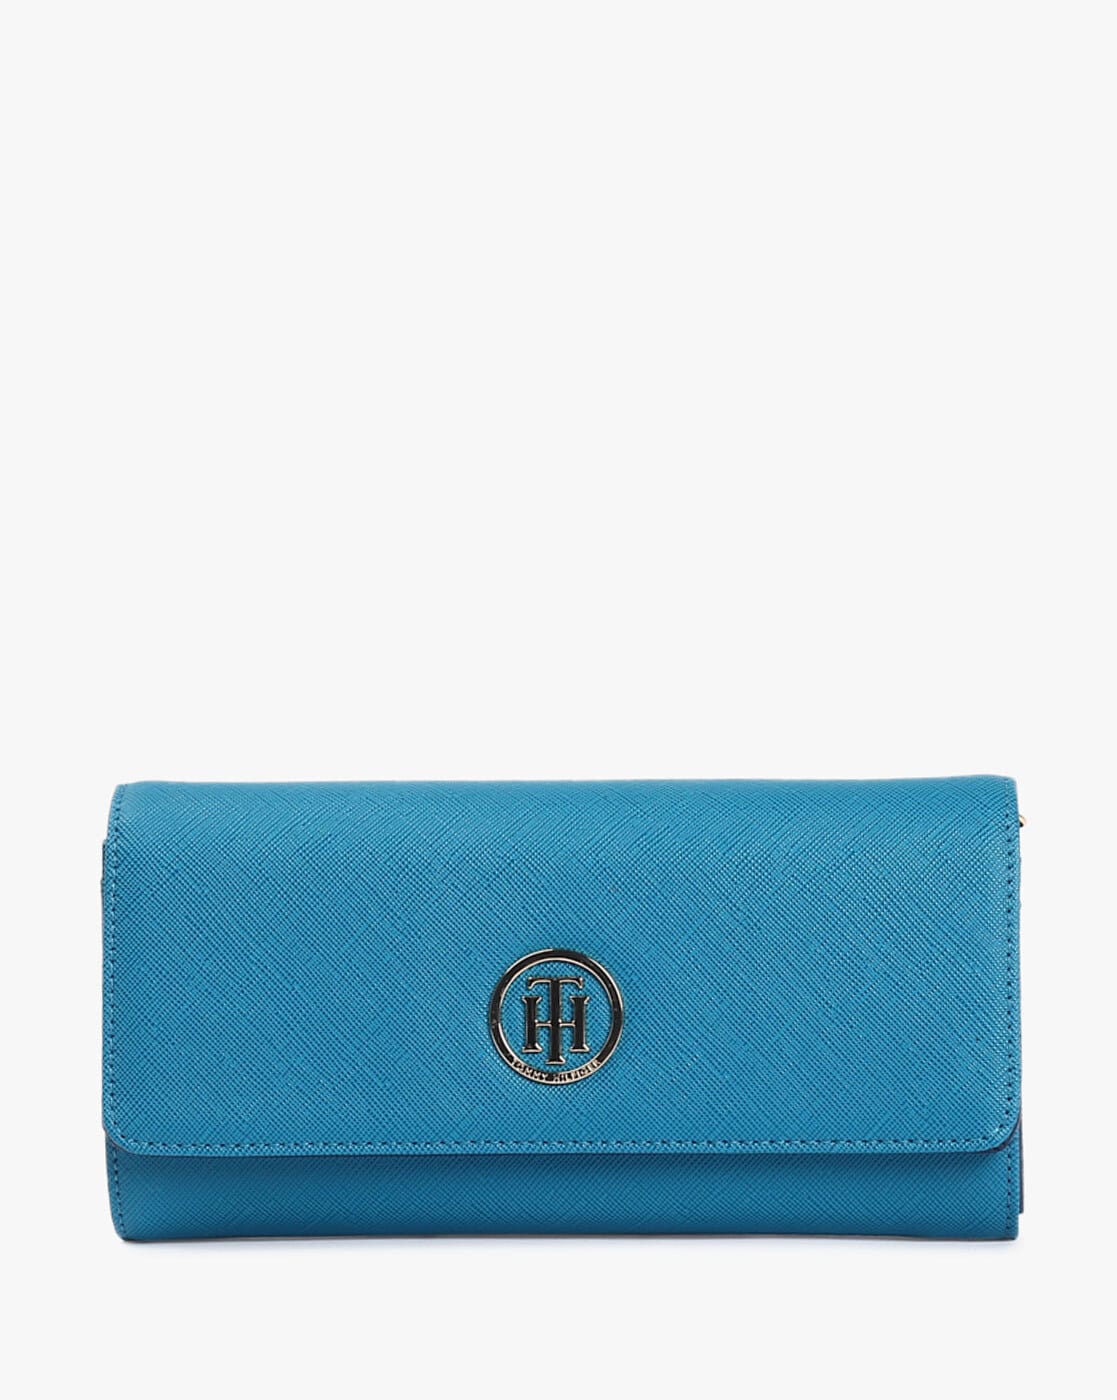 Buy Clutches & for Women by TOMMY Online Ajio.com